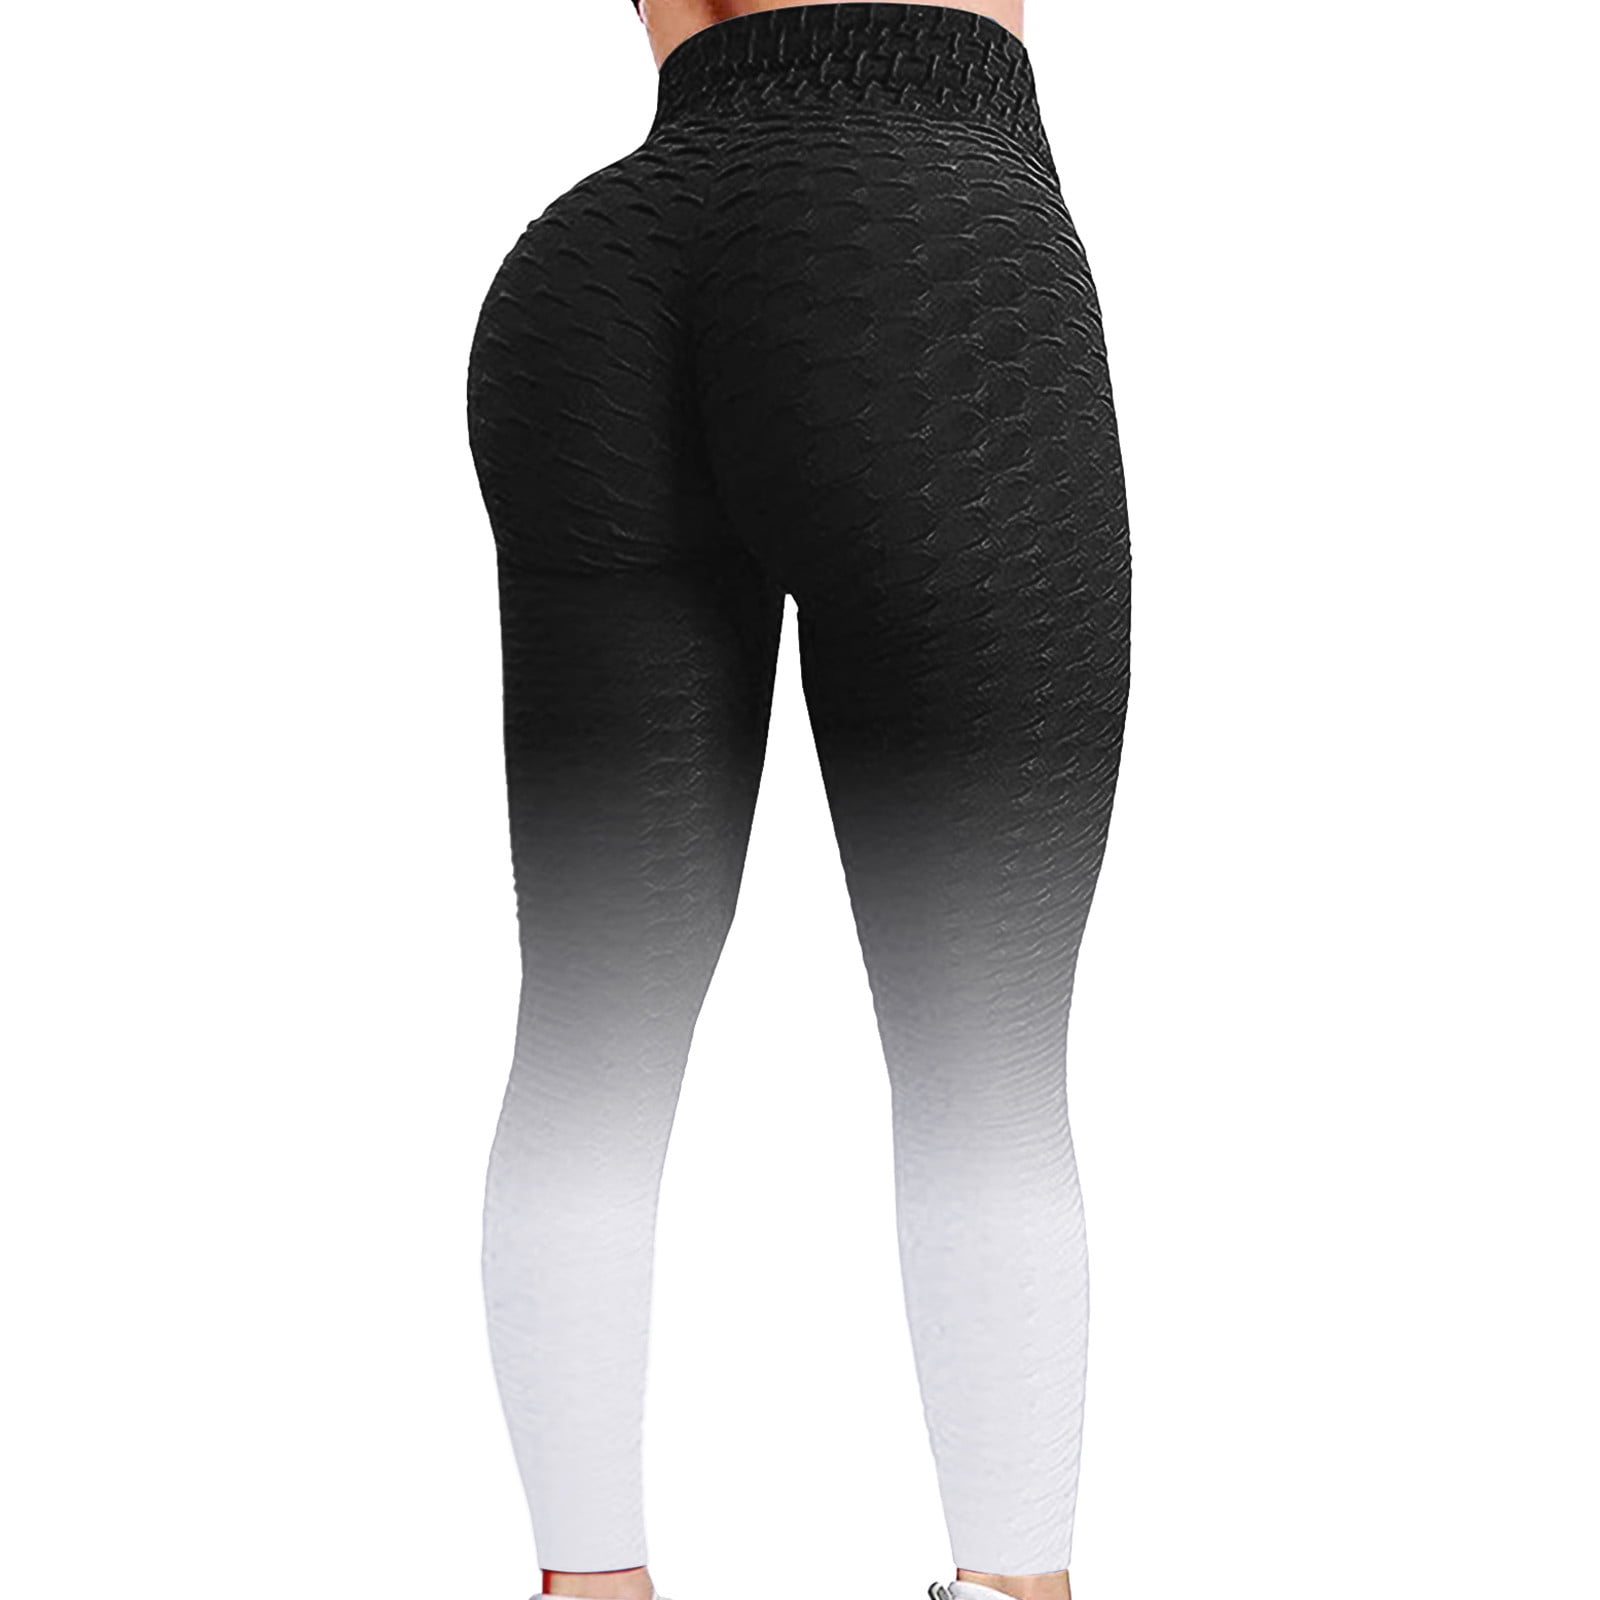 Aayomet Yoga Pants Leggings for Women-No See-Through High Waisted Tummy  Control Yoga Pants Workout Running Legging,Green 3XL 